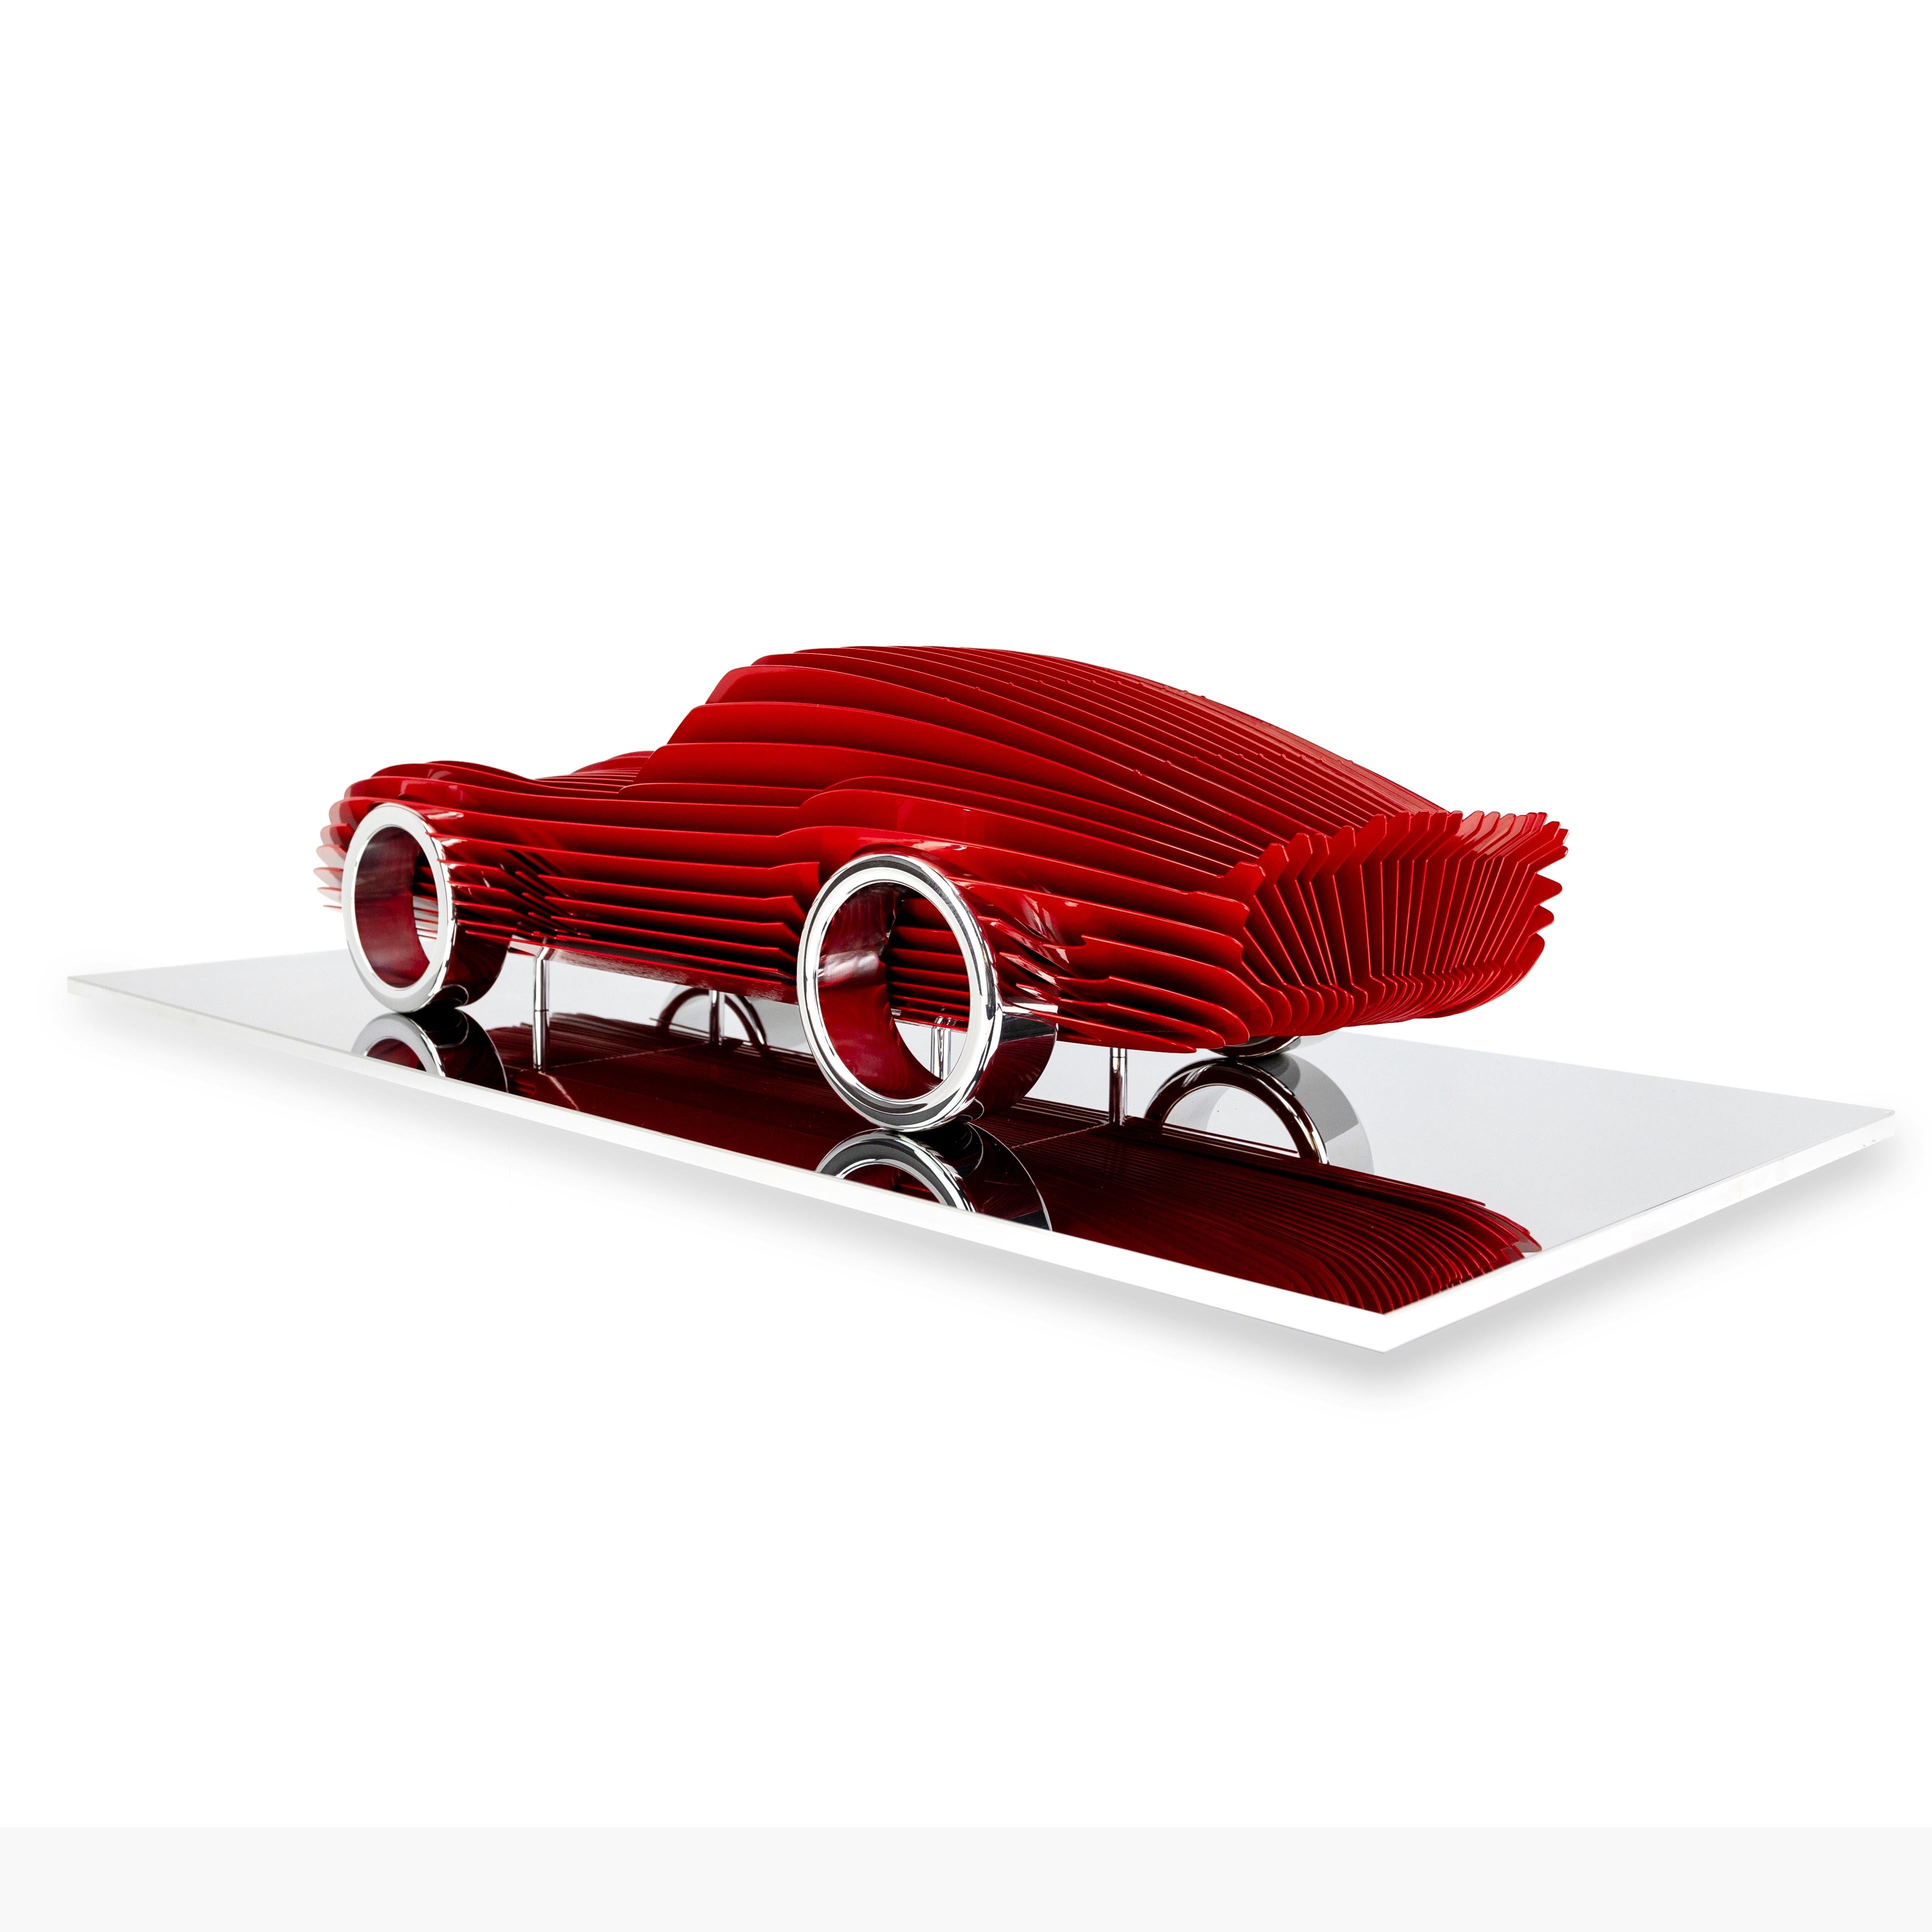 Ferrari - 250 GTO Streamlined - Red 8/8 - Abstract Sculpture by Antoine Dufilho